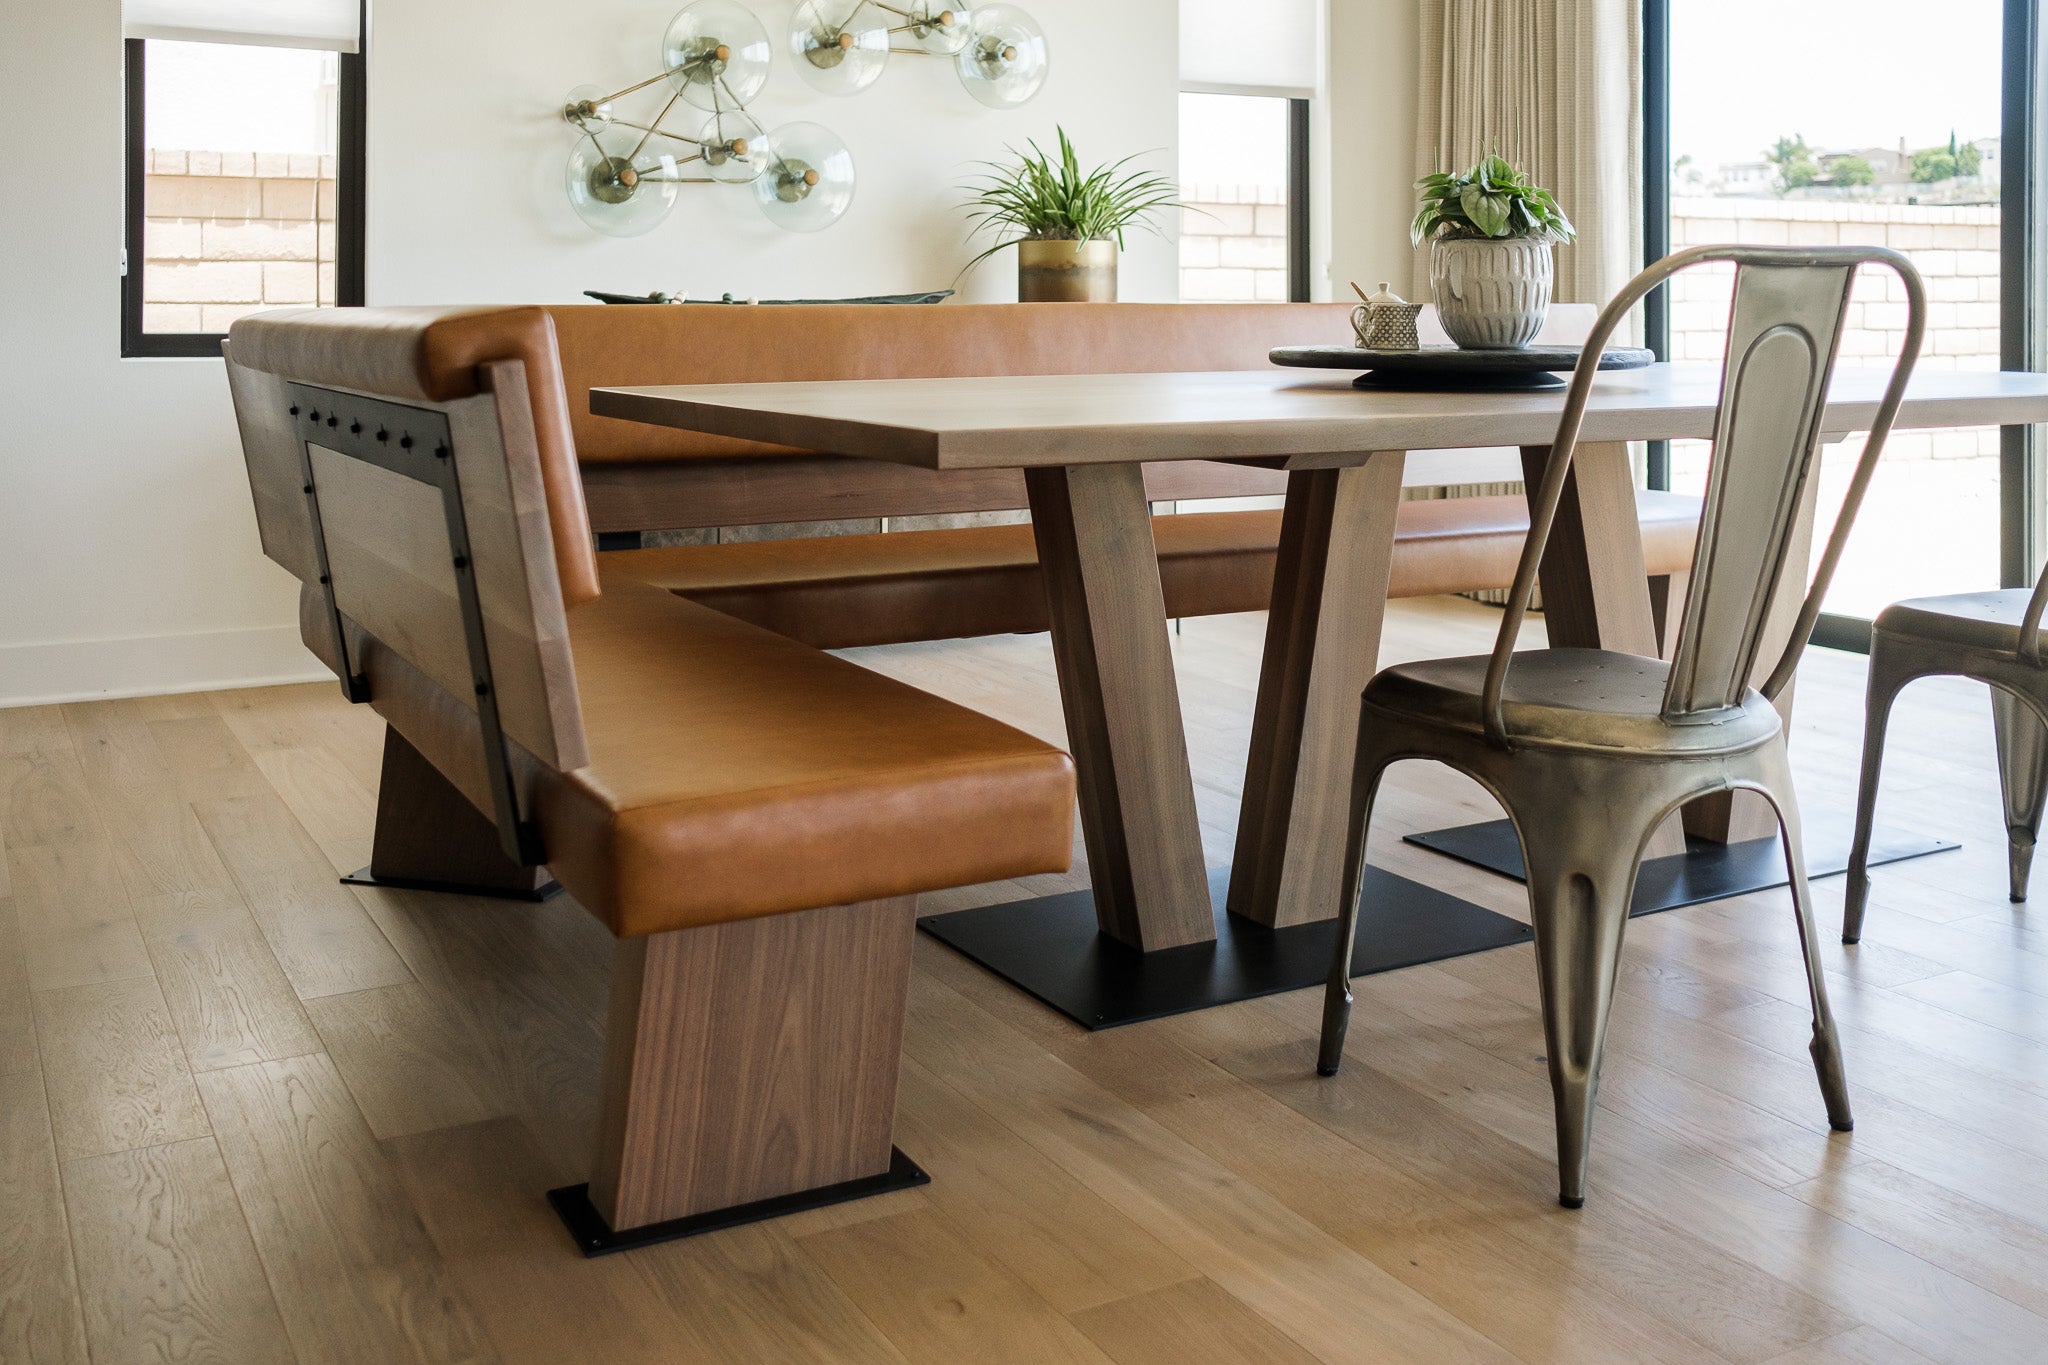 5 wood species that will make great furniture in your home